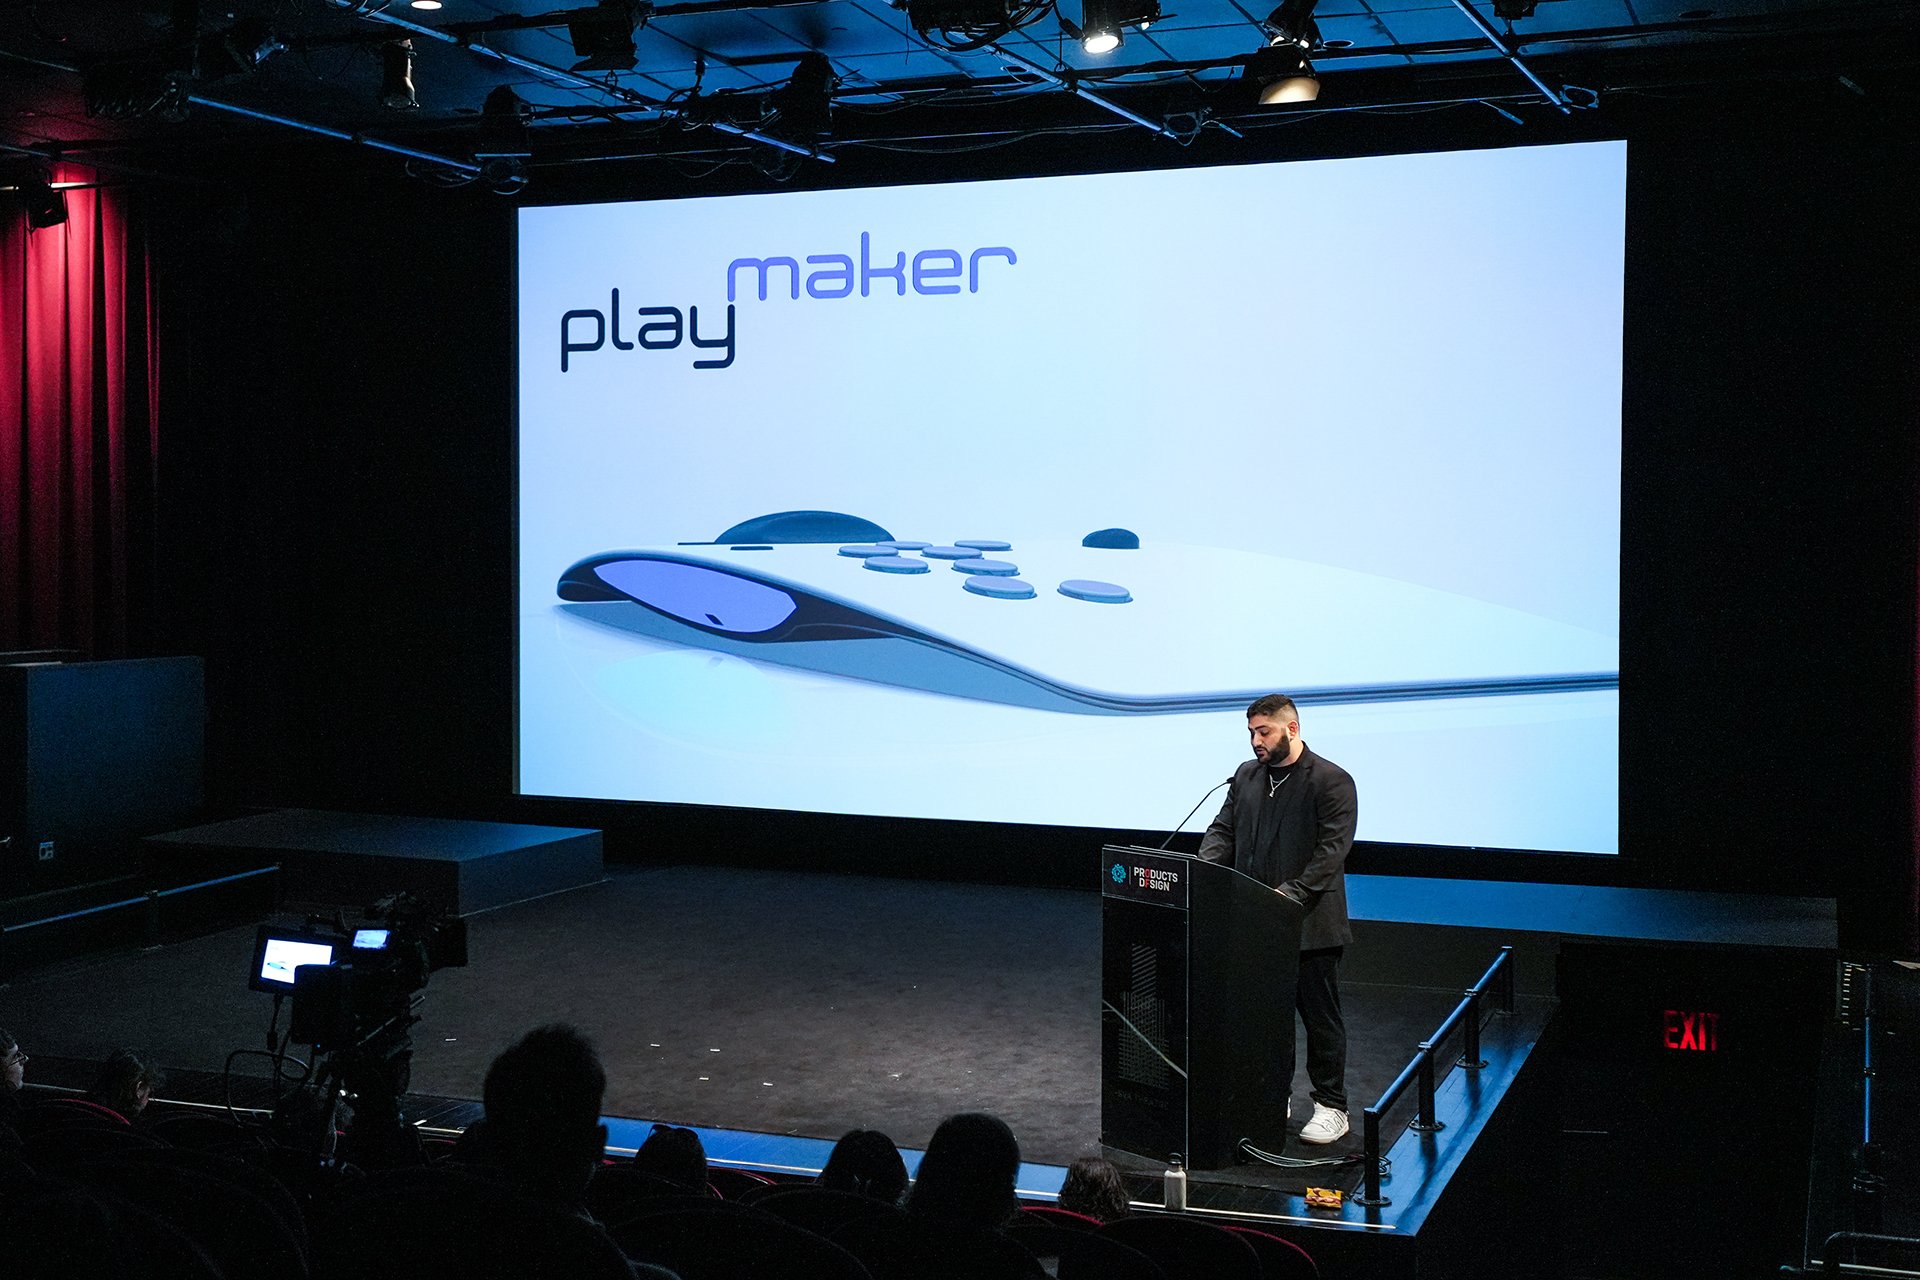  Speaker at podium with screen behind featuring a image of a product that reads “Play Maker” 